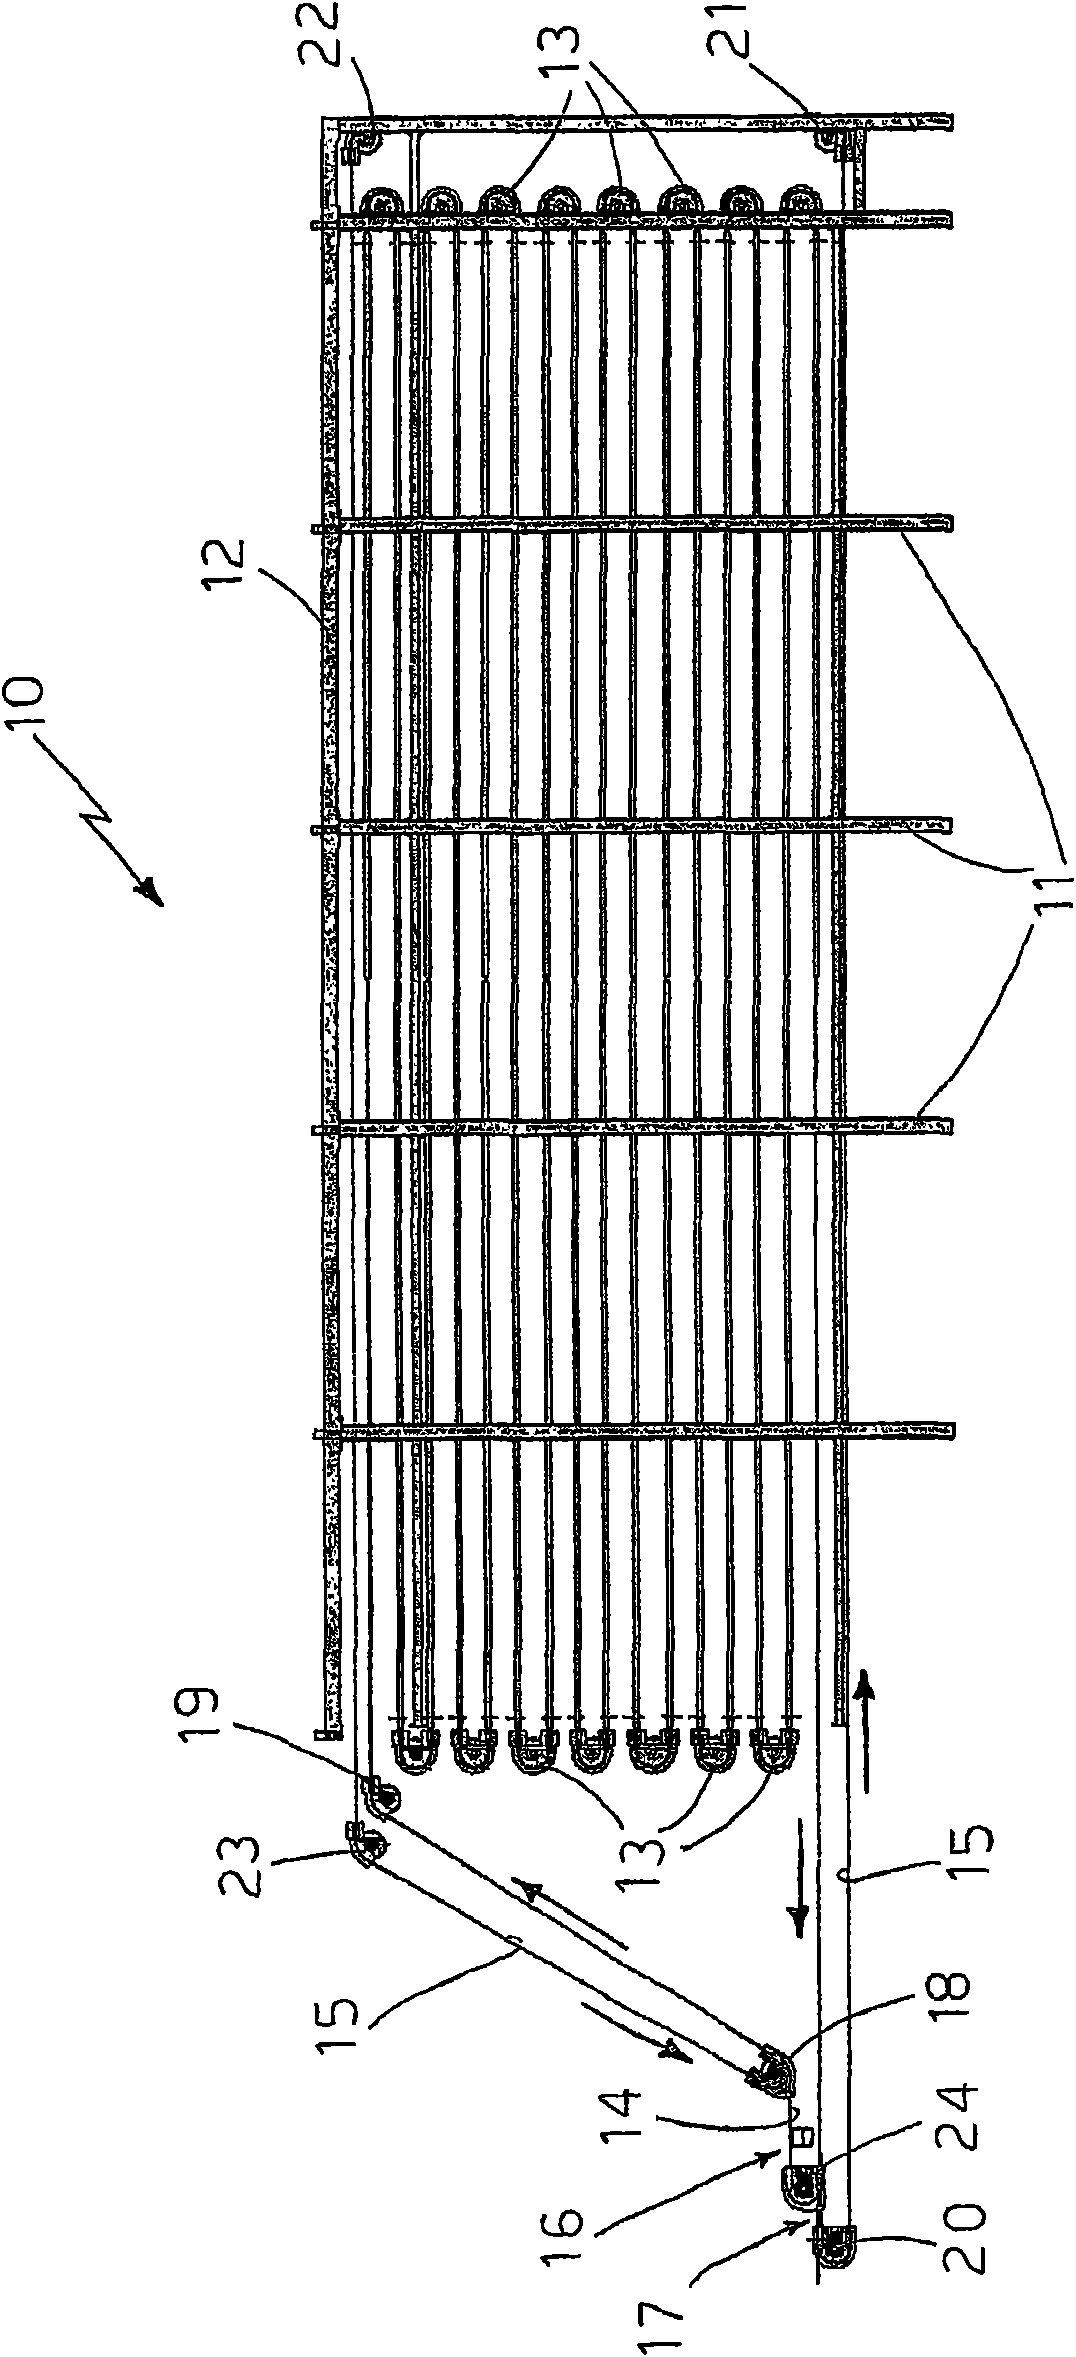 Conveyor apparatus with overlapping conveyor belts for leather, or similar, drying plants, or treatment plants in general, in controlled environments